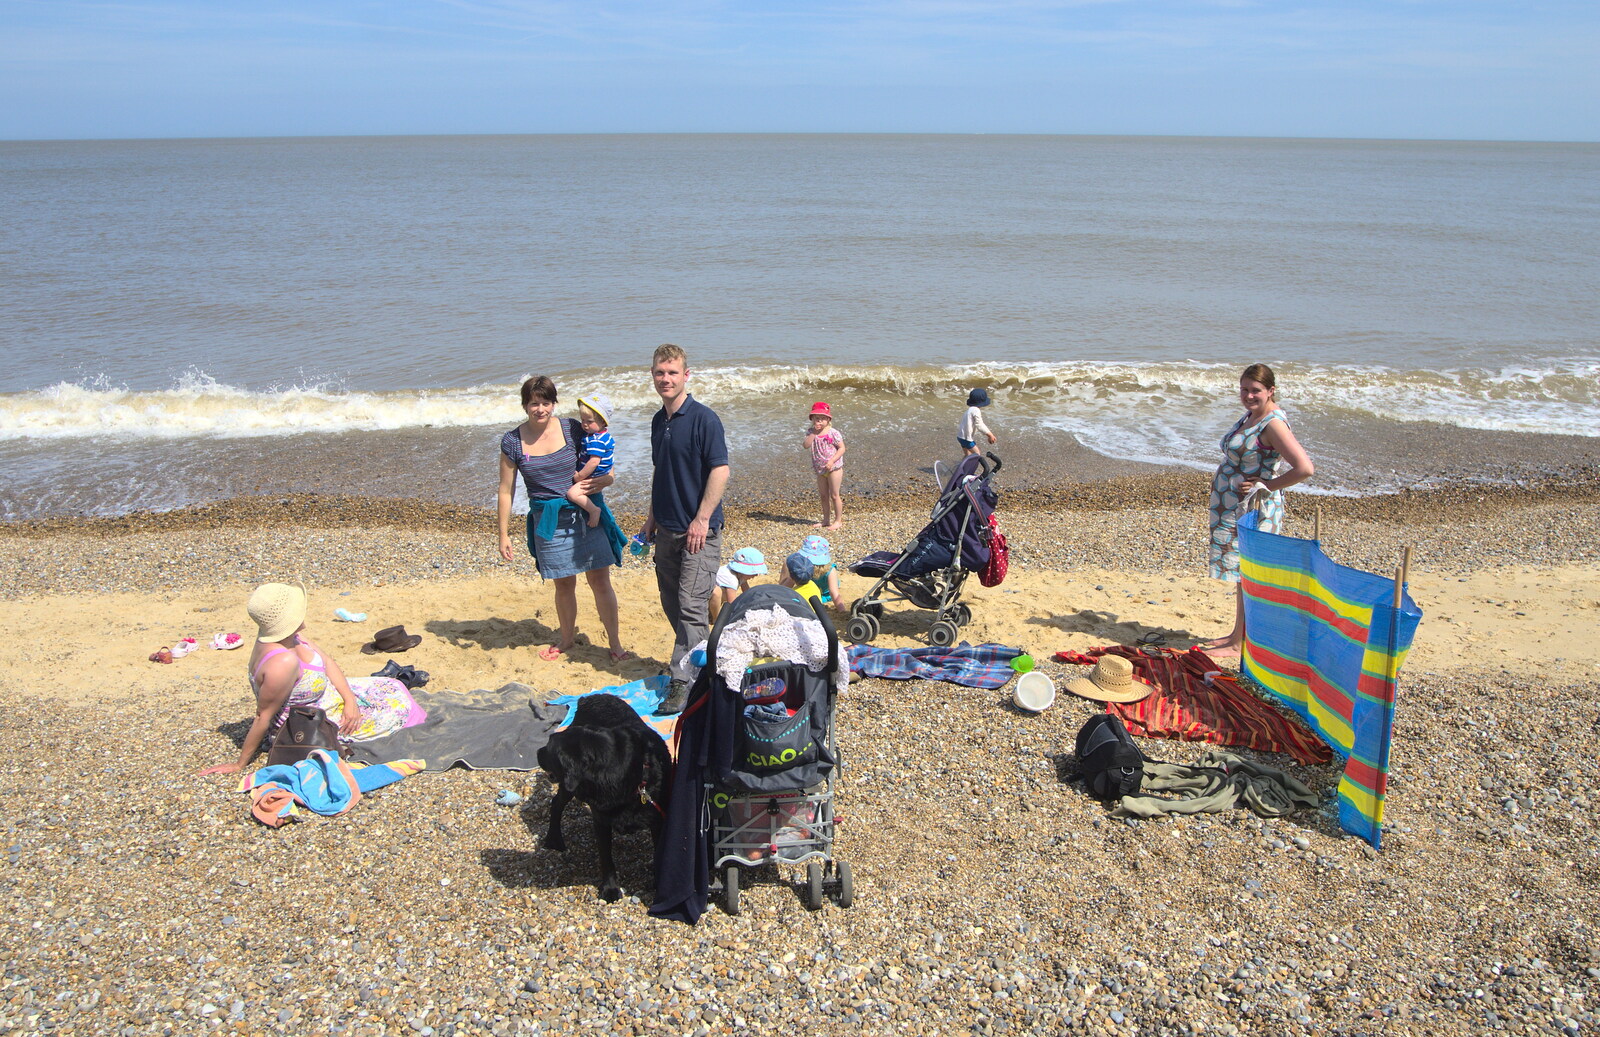 The beach group from Petrol Station Destruction, and a Cliff House Camping Trip, Southwark and Dunwich, Suffolk - 30th June 2013